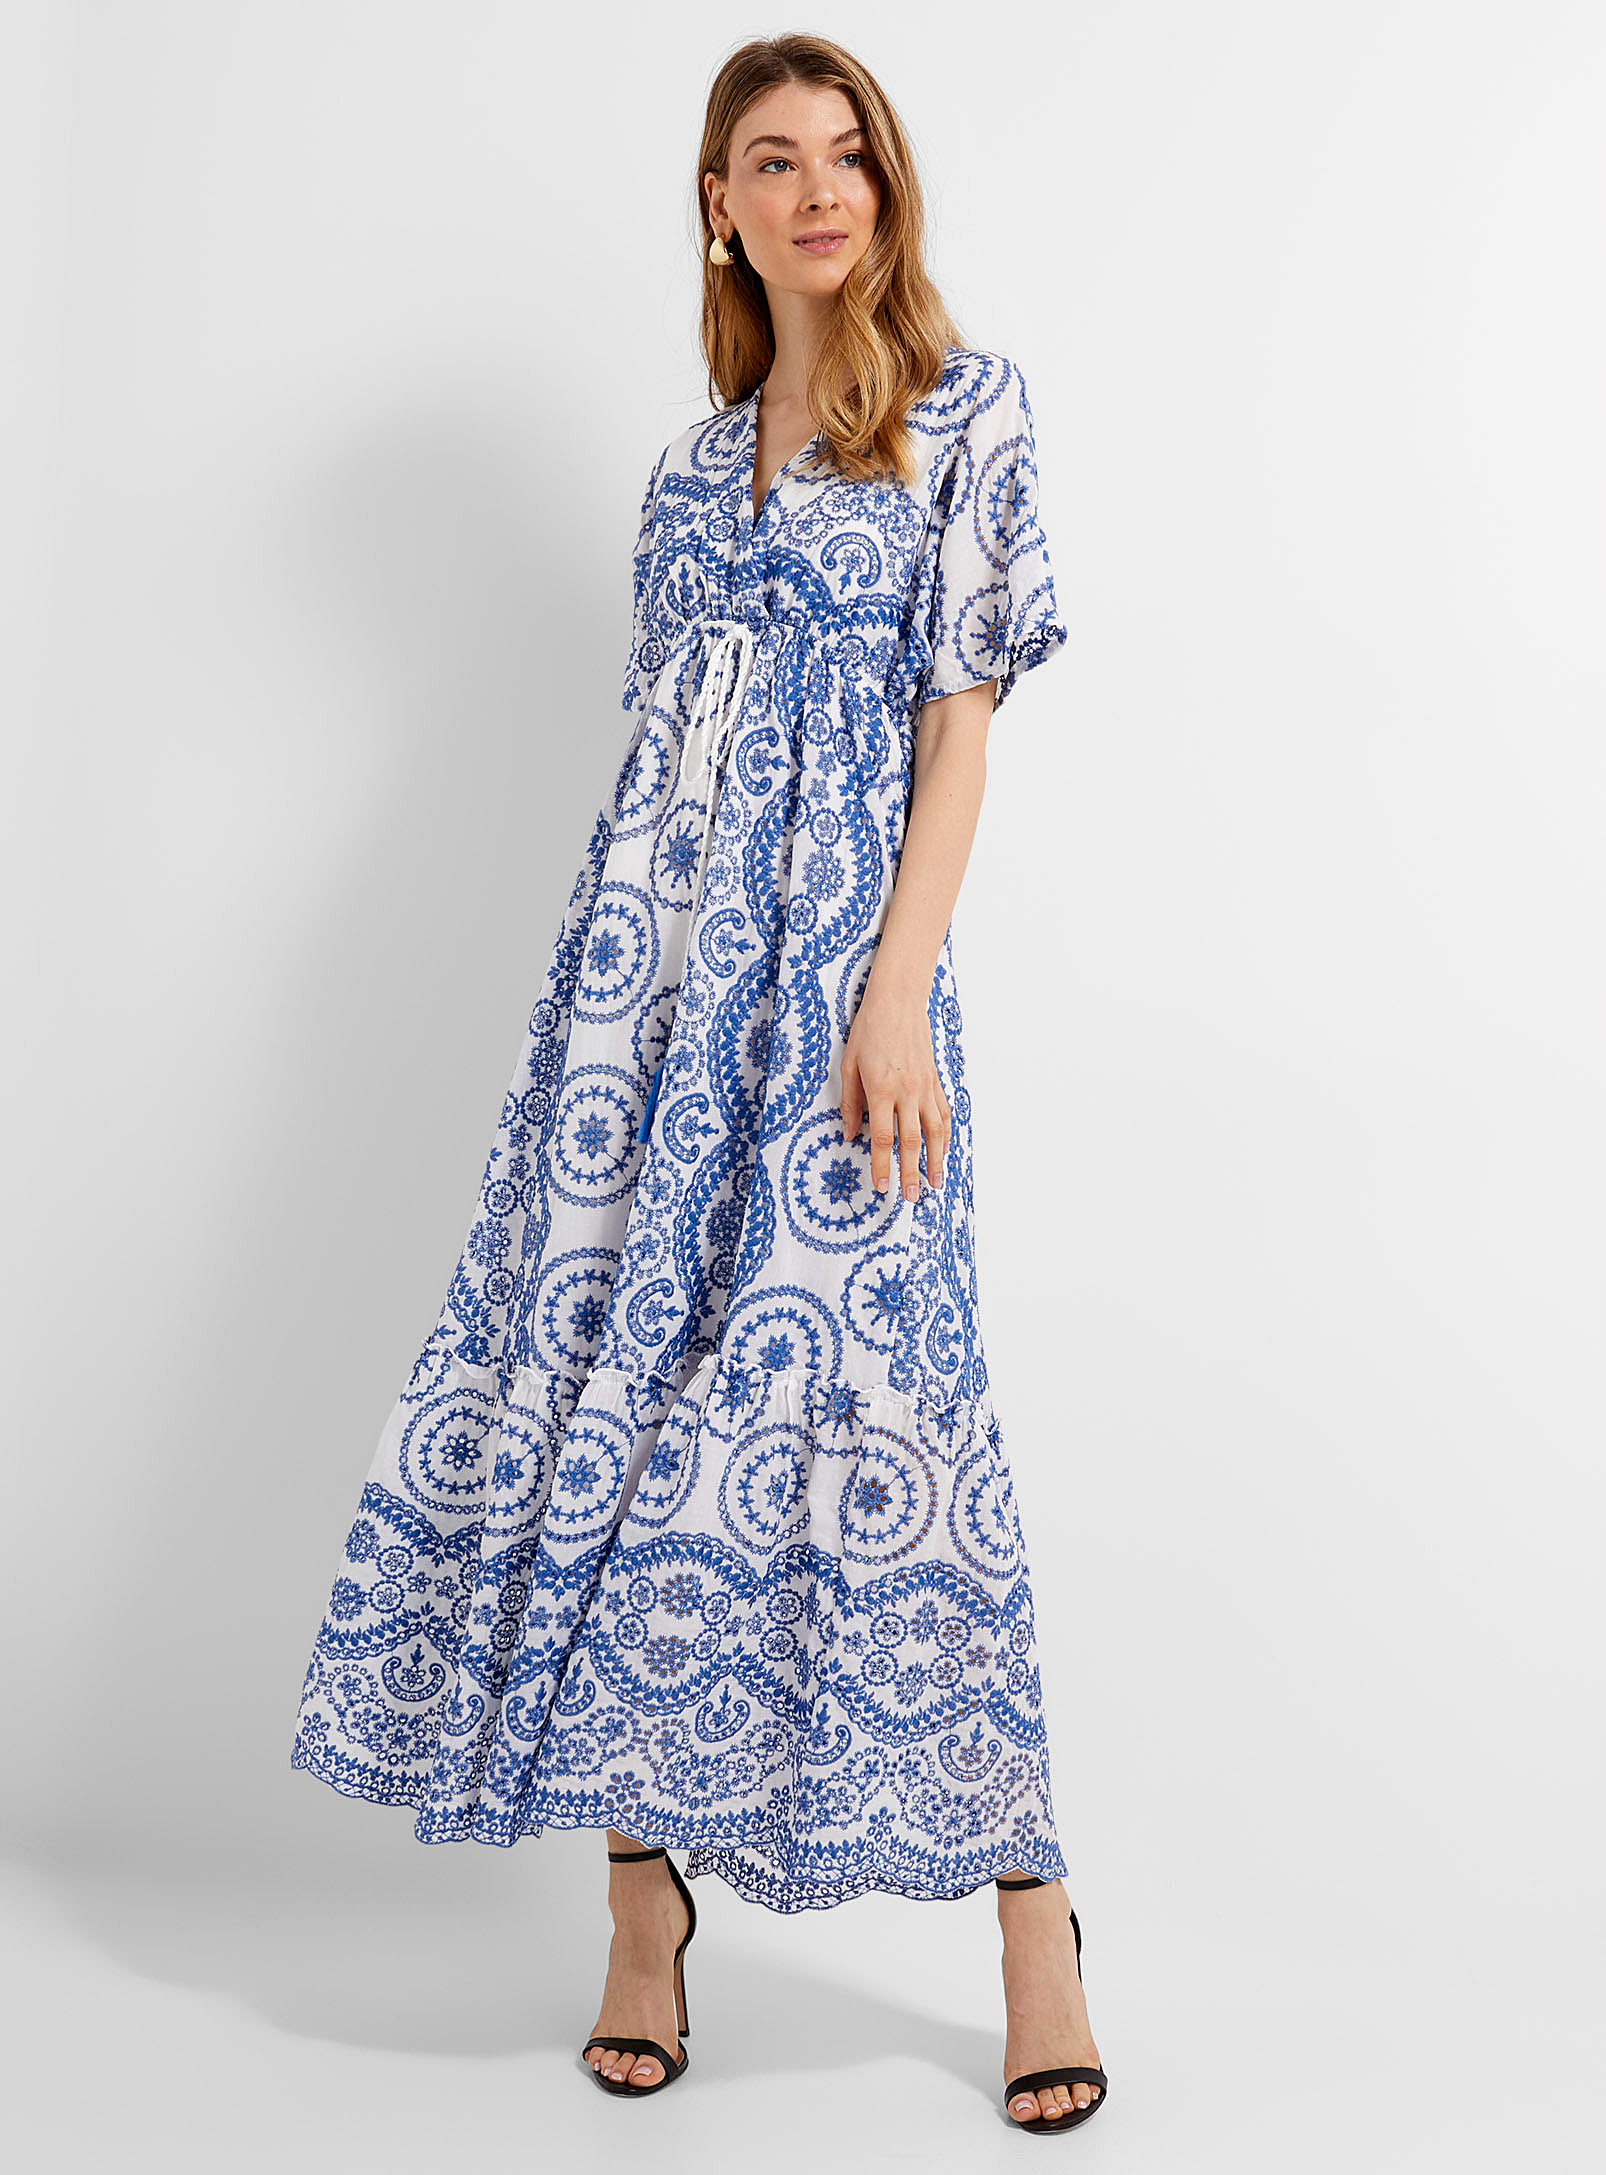 Contemporaine Tasseled Broderie Anglaise Dress In Patterned Blue